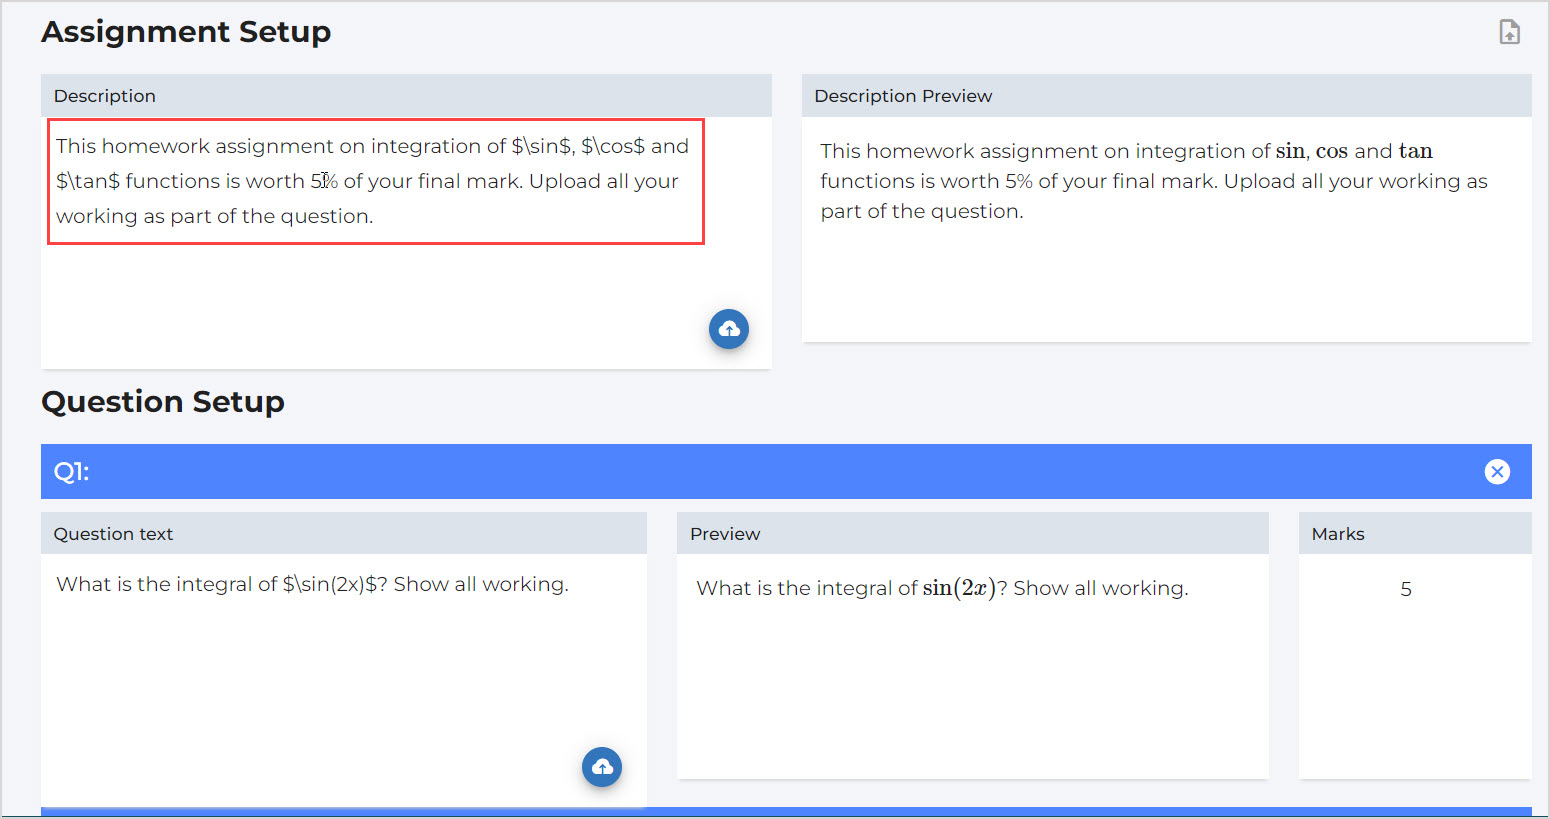 The Assignment Setup and Question Setup headings are highlighted, with content to be edited in these sections.